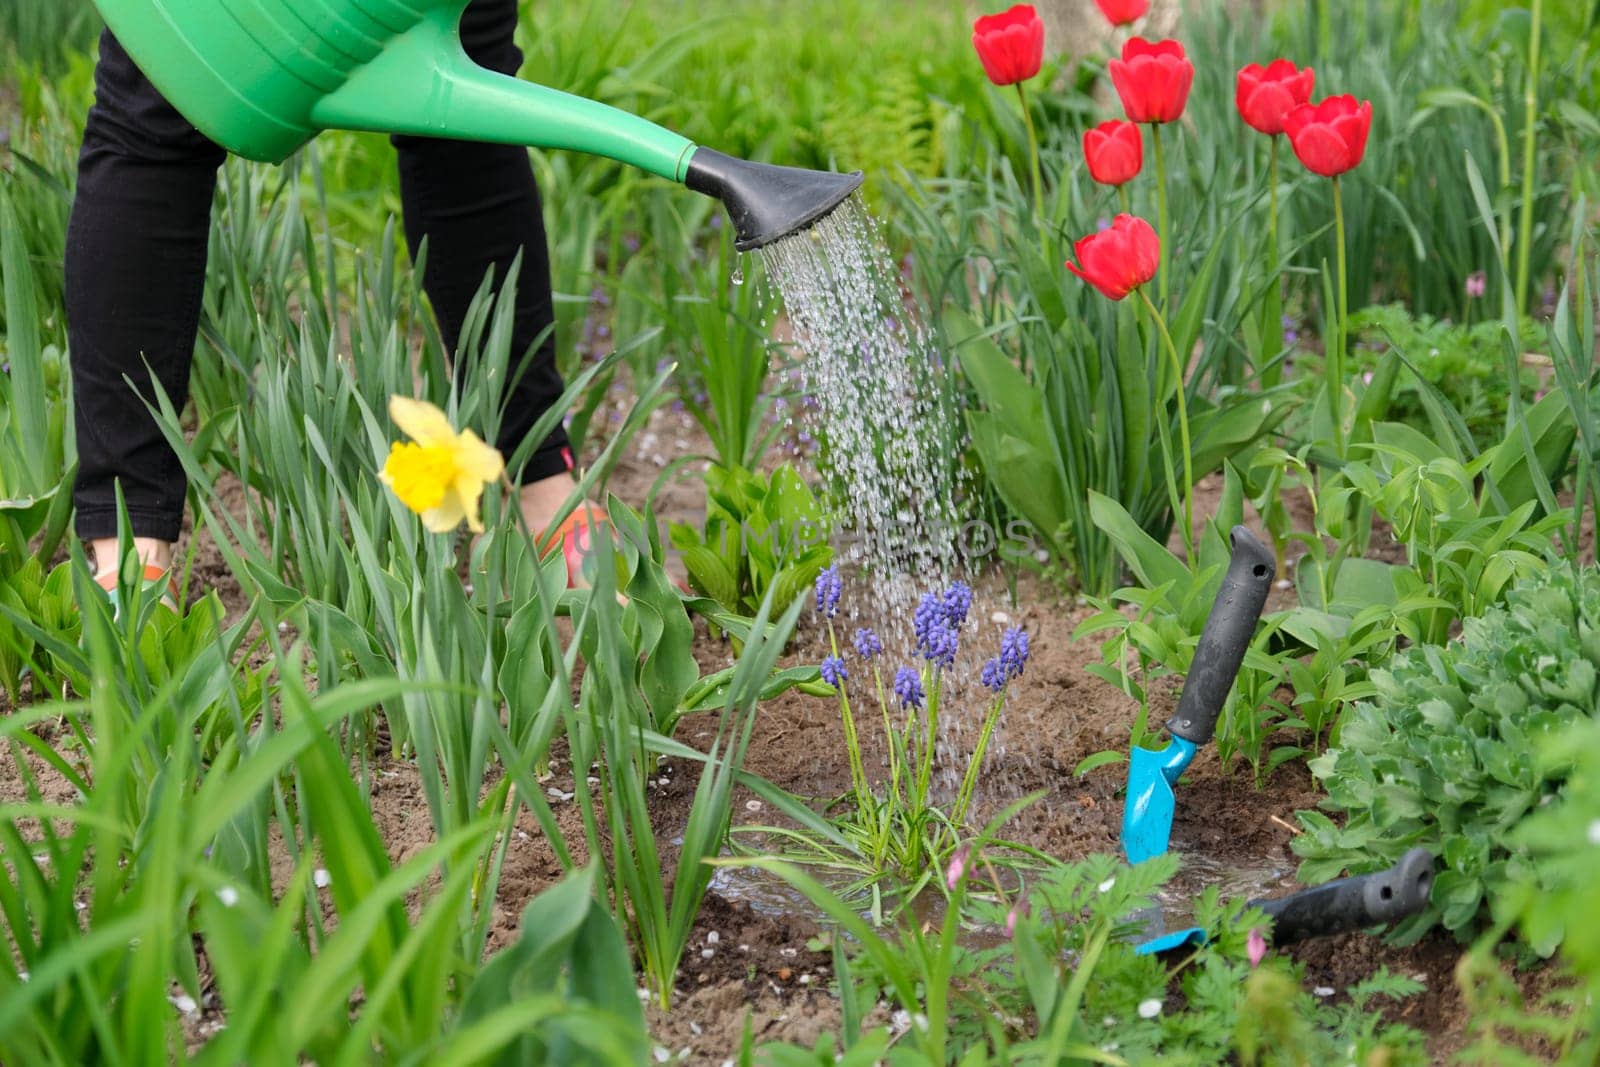 Springtime, spring seasonal gardening. Woman hands with garden tools working with soil and watering blue muscari flowers Grape Hyacinth with young green plants